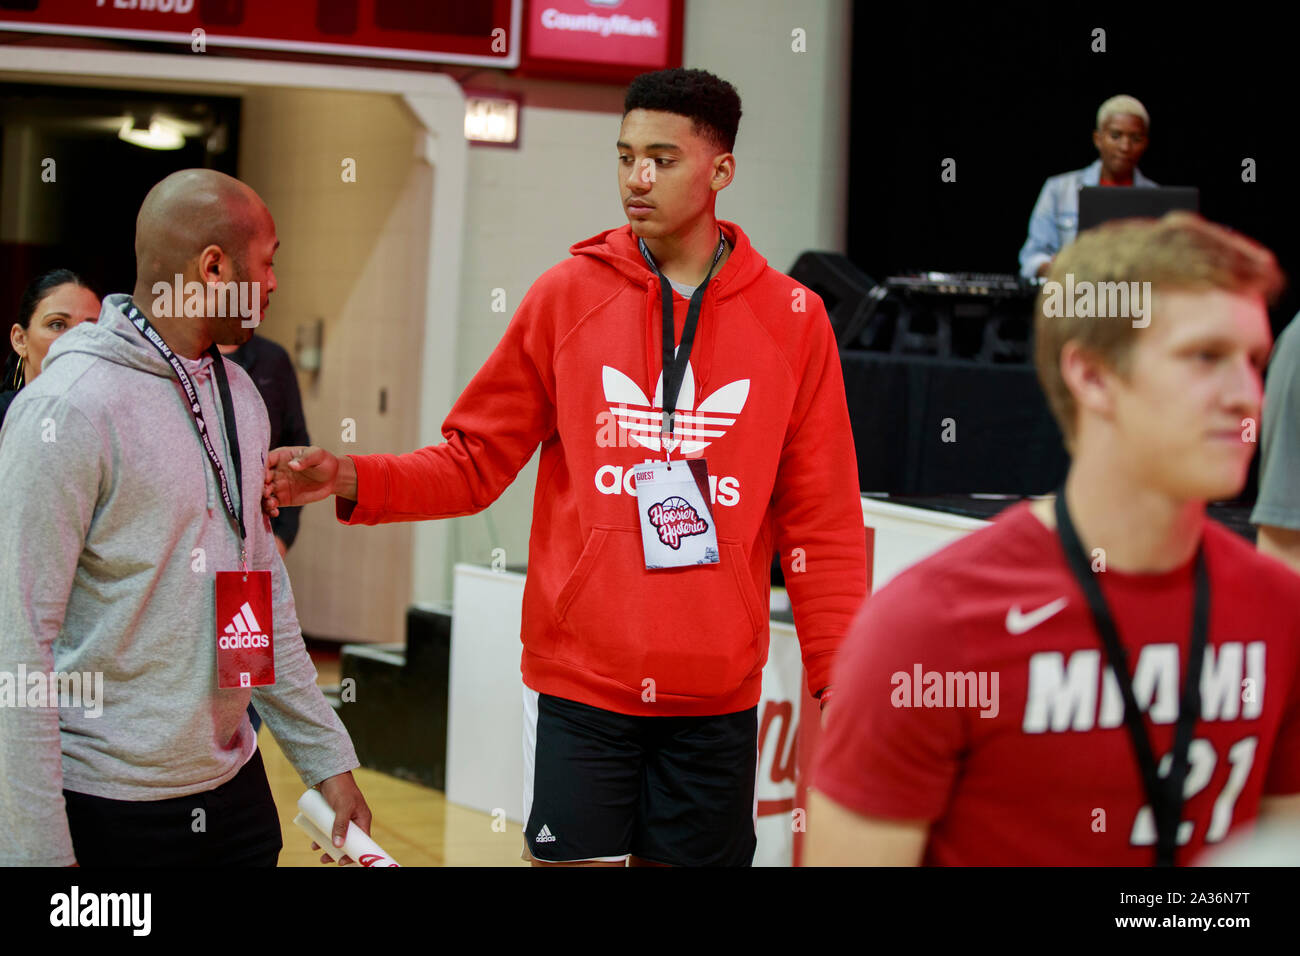 Indiana University basketball recruit Trey Kaufman visits Assembly Hall during Hoosier Hysteria, Saturday, October 5, 2019 in Bloomington, Ind. The Hoosier Hysteria event officially kicks off basketball season at Indiana University whose team has won five national division 1 NCAA basketball titles. (Photo by Jeremy Hogan/The Bloomingtonian) Stock Photo